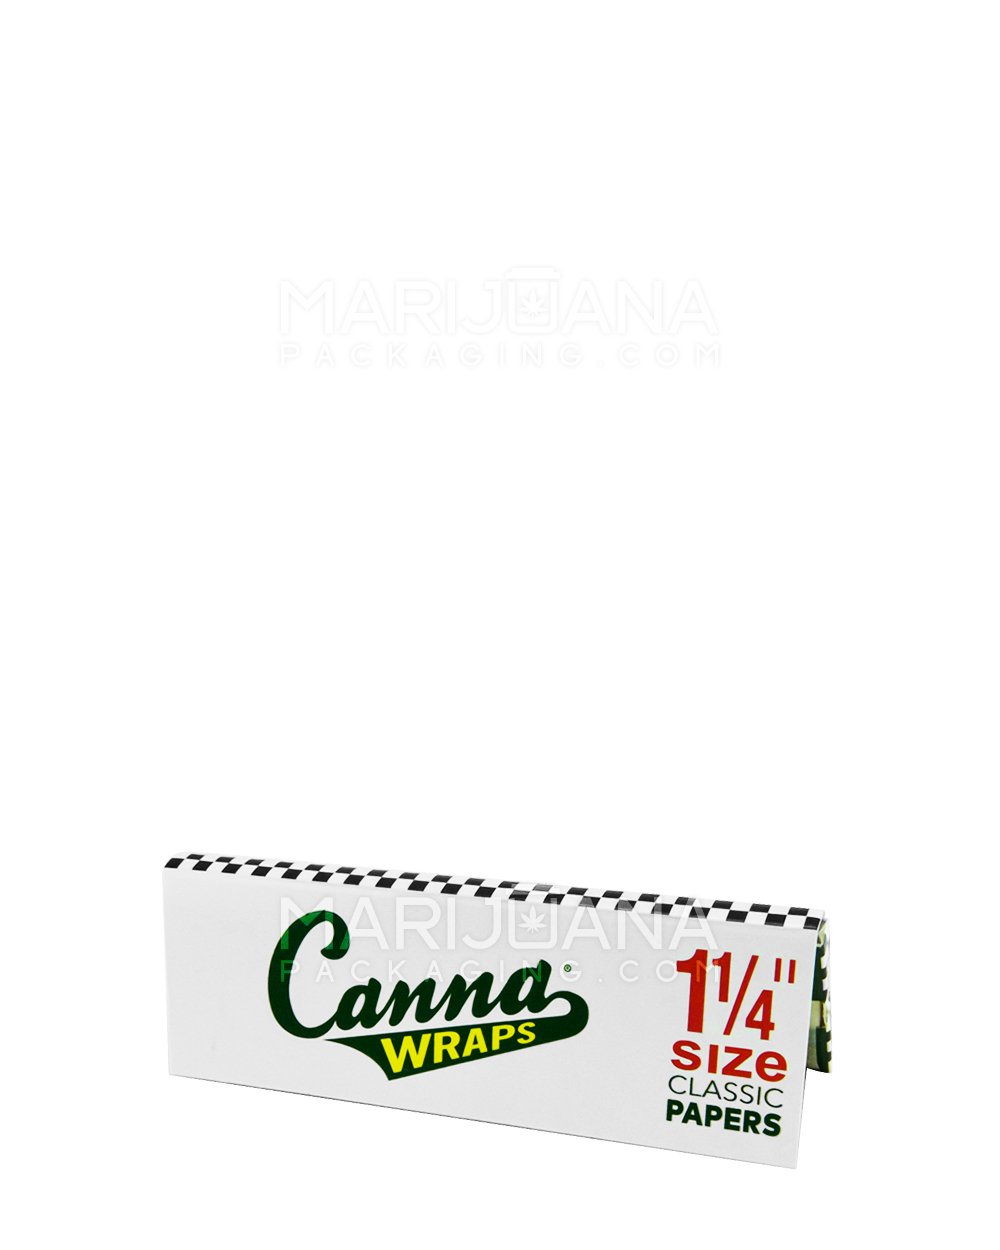 CANNA WRAPS | 'Retail Display' 1 1/4 Size Rolling Papers | 83mm - Classic - 25 Count - 6